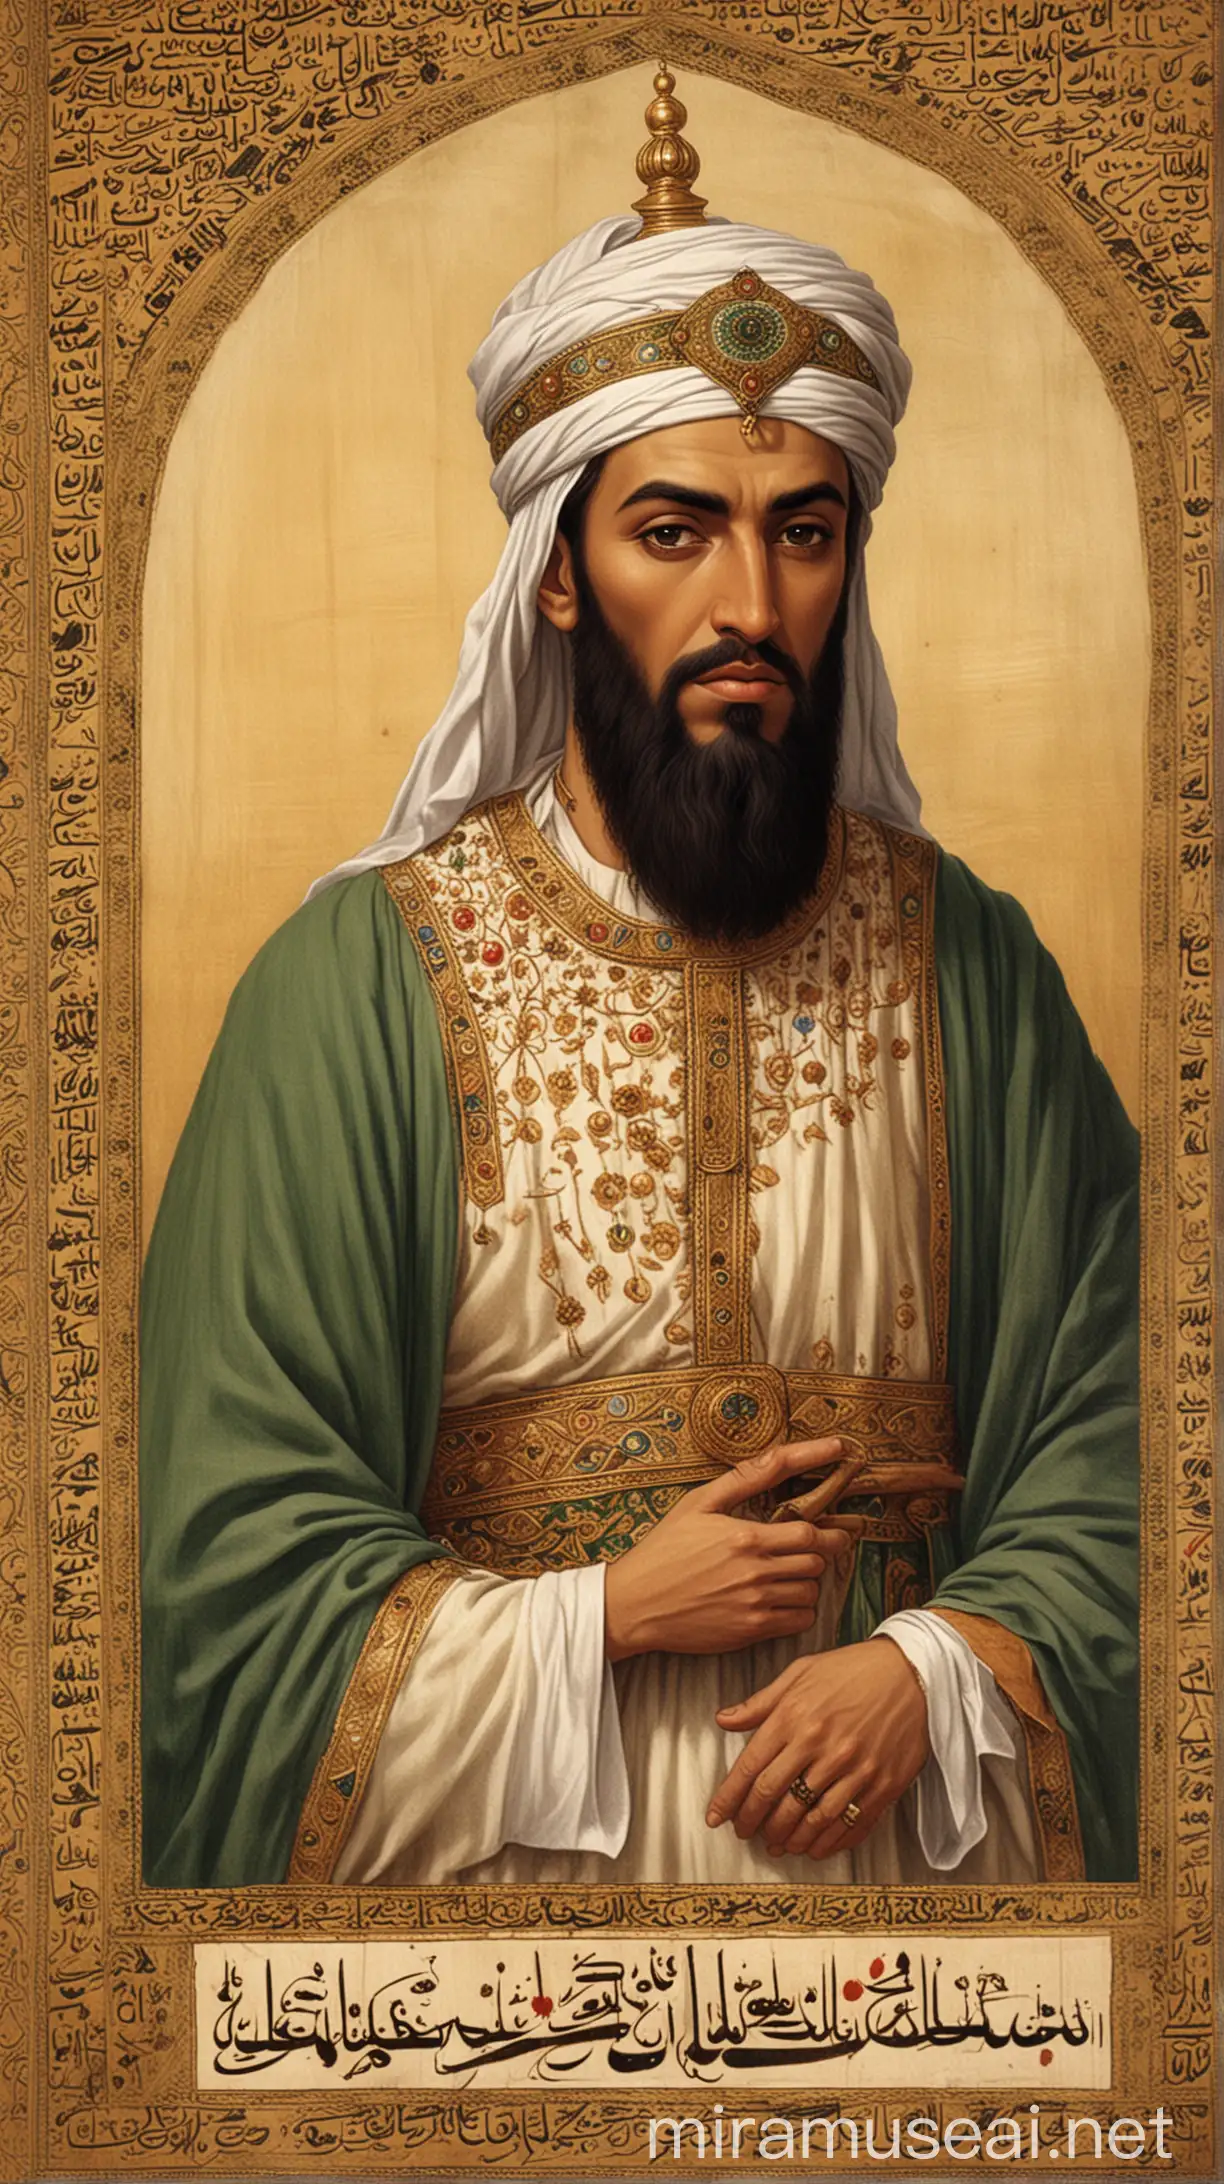 An image depicting ʿUmar I, the second Muslim caliph, born in Mecca around 586 AD. He played a crucial role in shaping the early Islamic community and governance.

